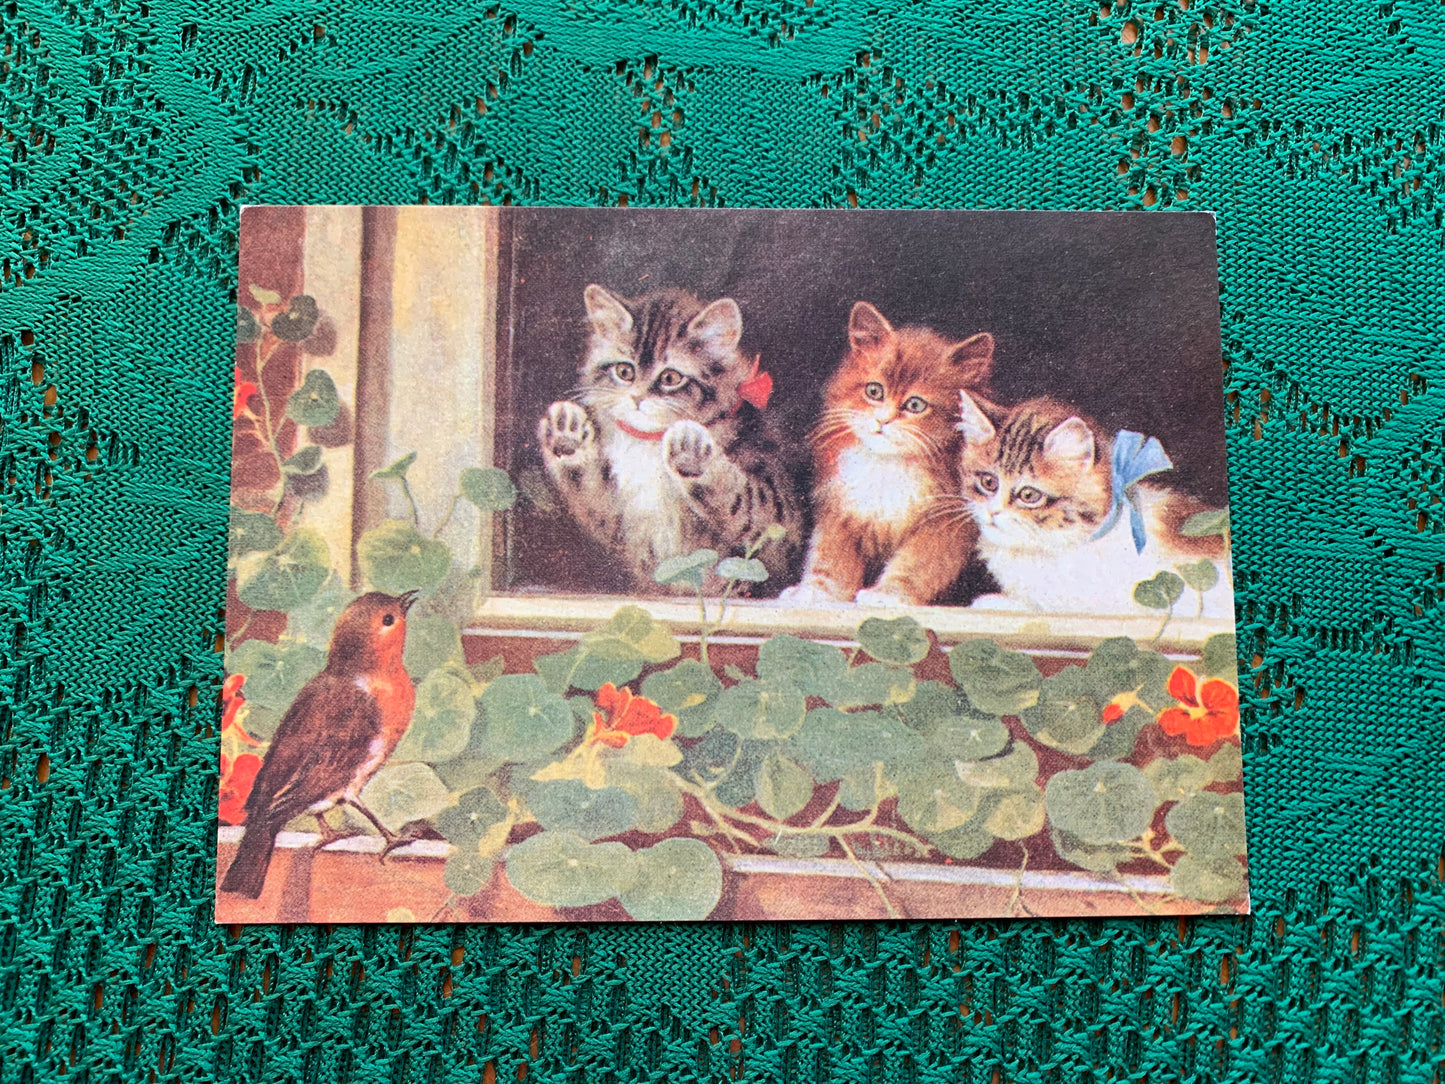 Finnish art postcard with cats - Printed in Finland - Greeting card, collectible postcard - unused